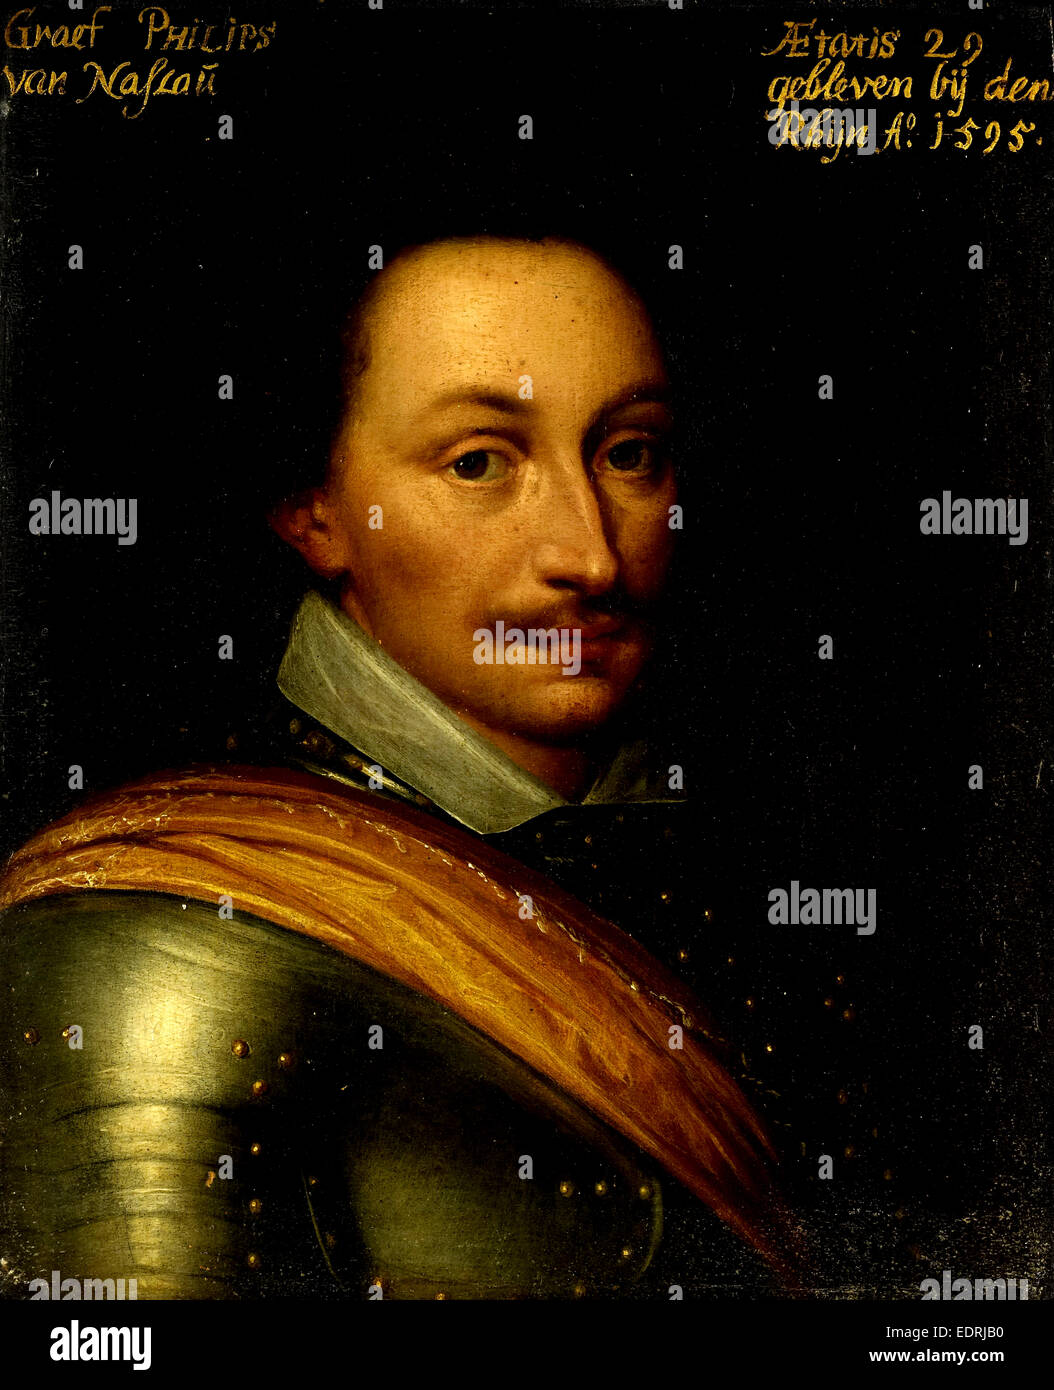 Portrait of Philip, Count of Nassau, Governor of the Town of Nijmegen The Netherlands, Anonymous, c. 1609 - c. 1633 Stock Photo